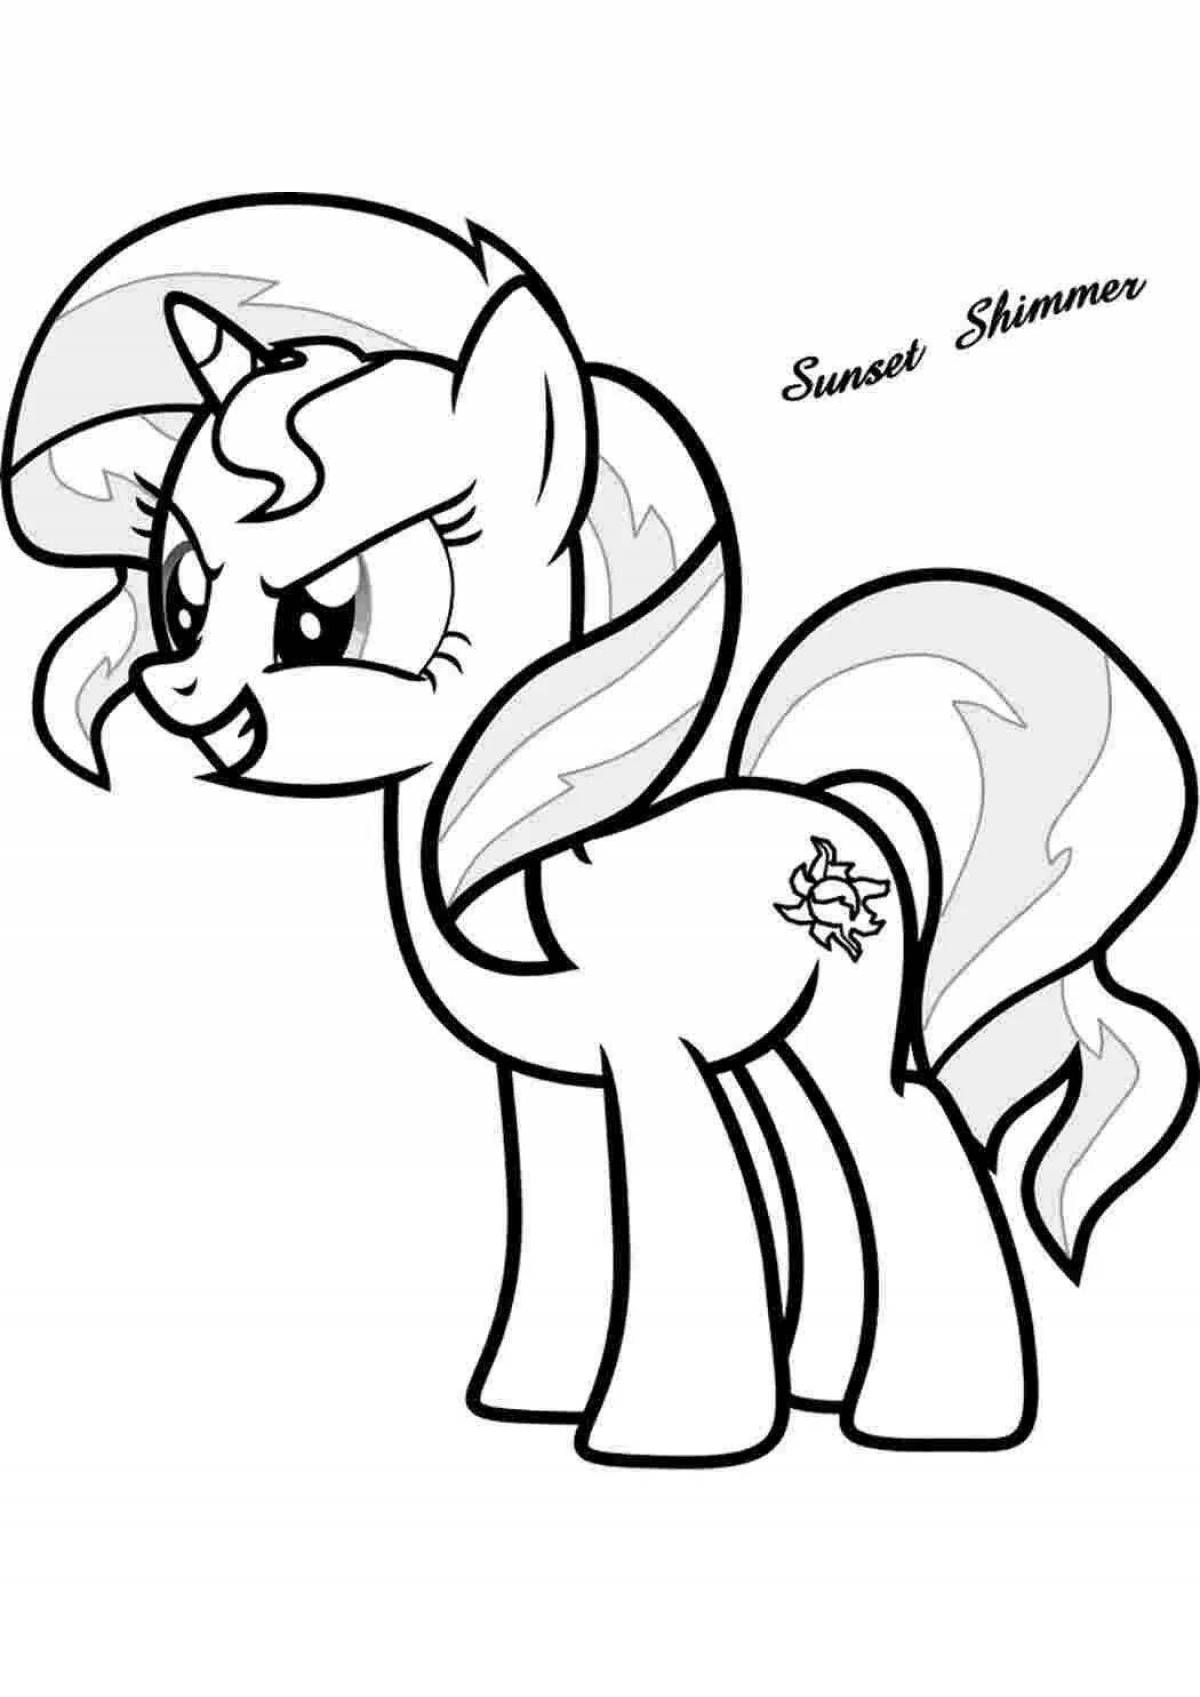 Coloring book dazzling sunset shimmer